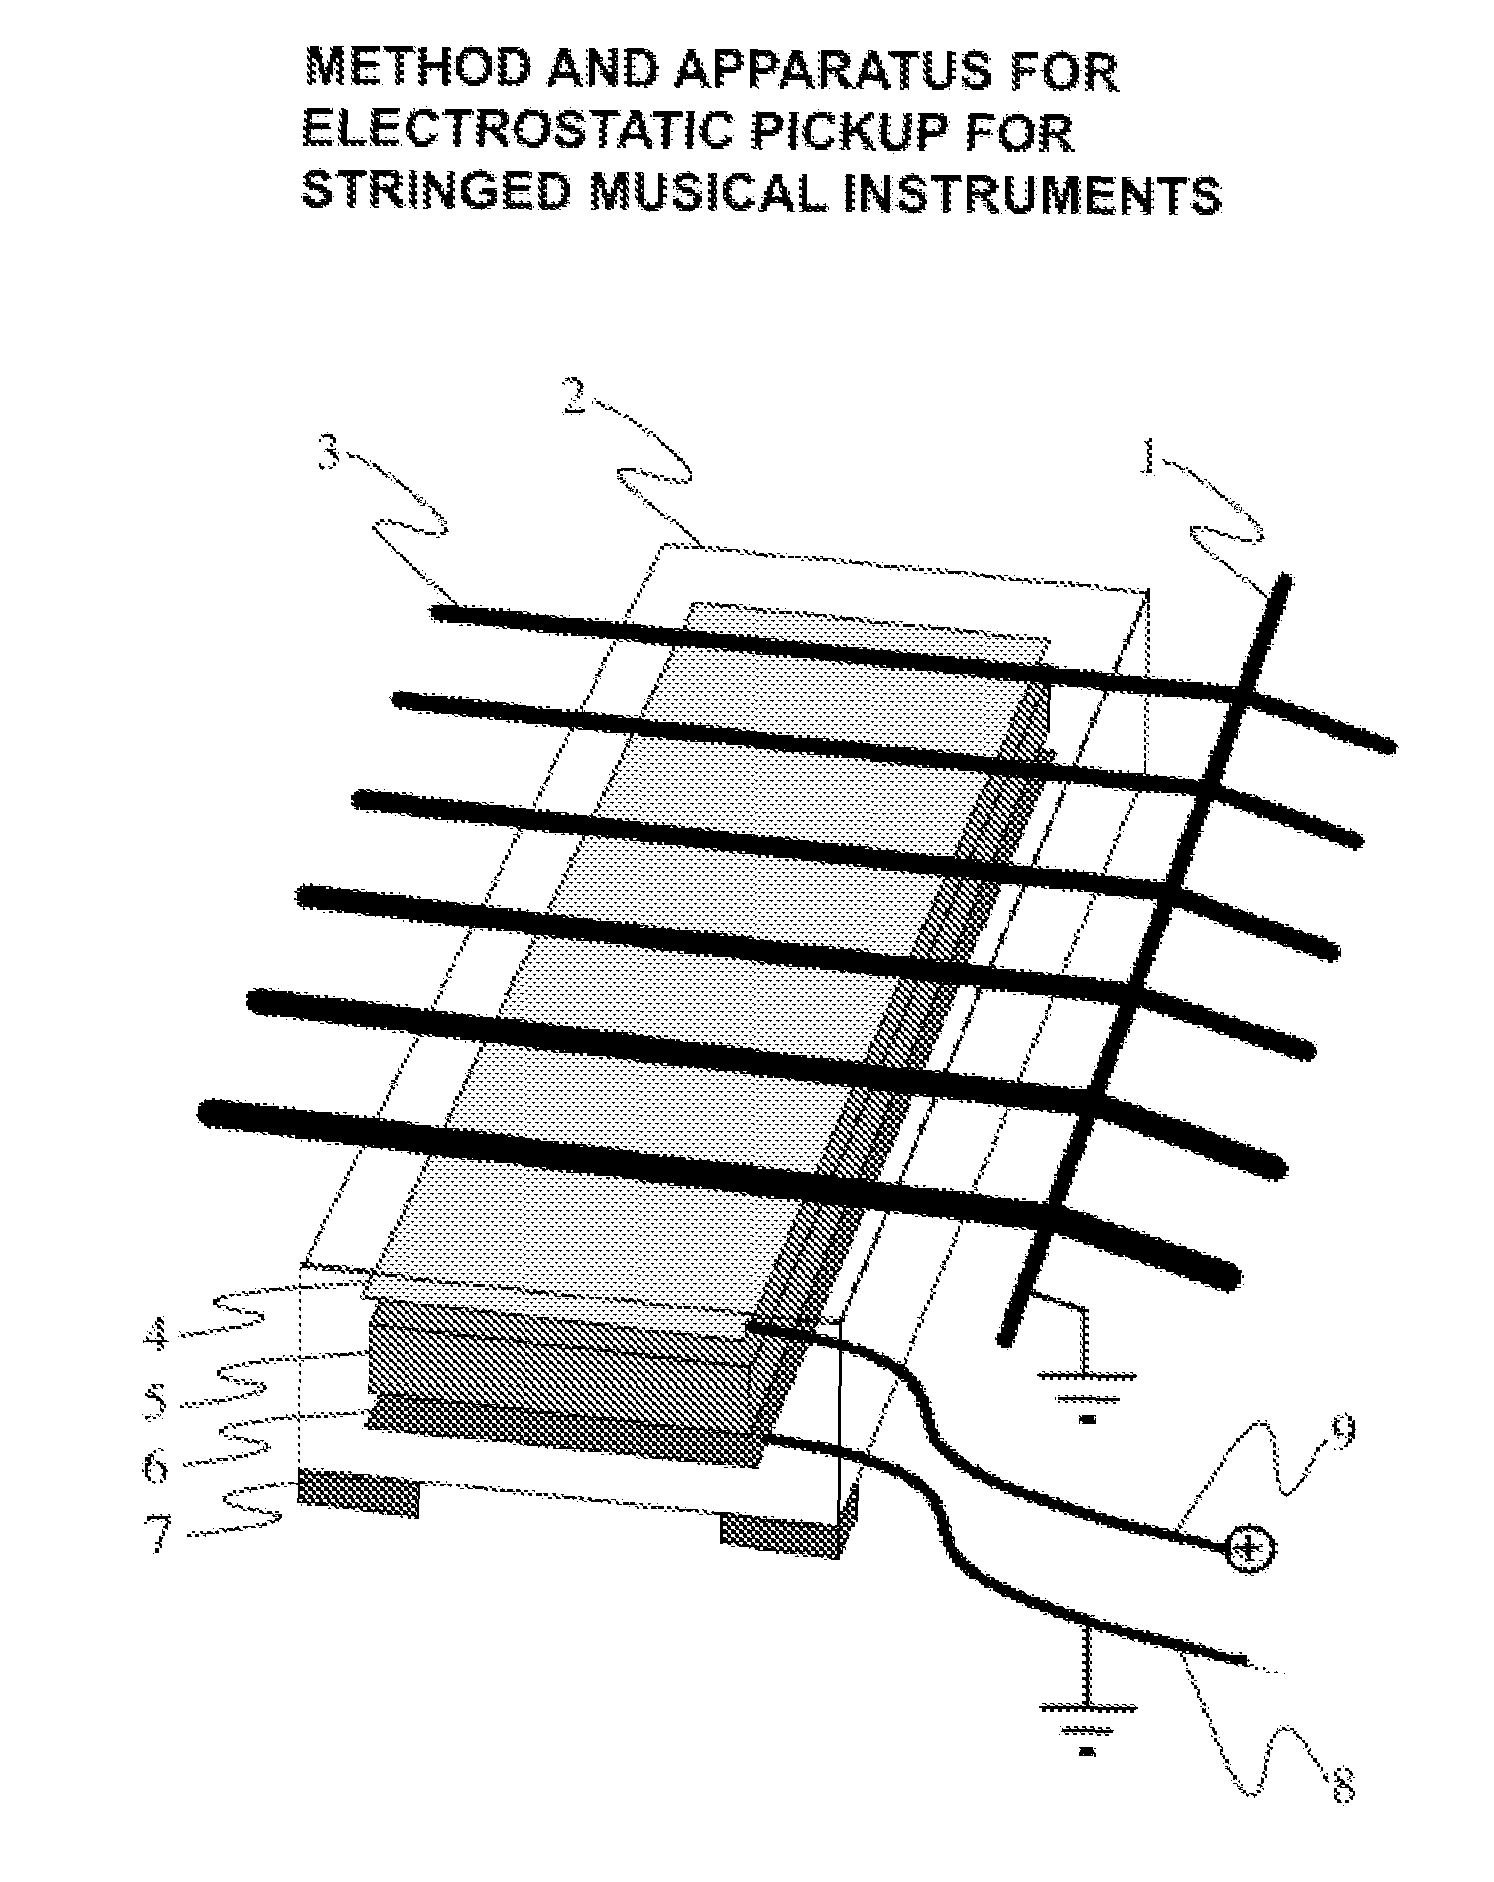 Method and apparatus for electrostatic pickup for stringed musical instruments